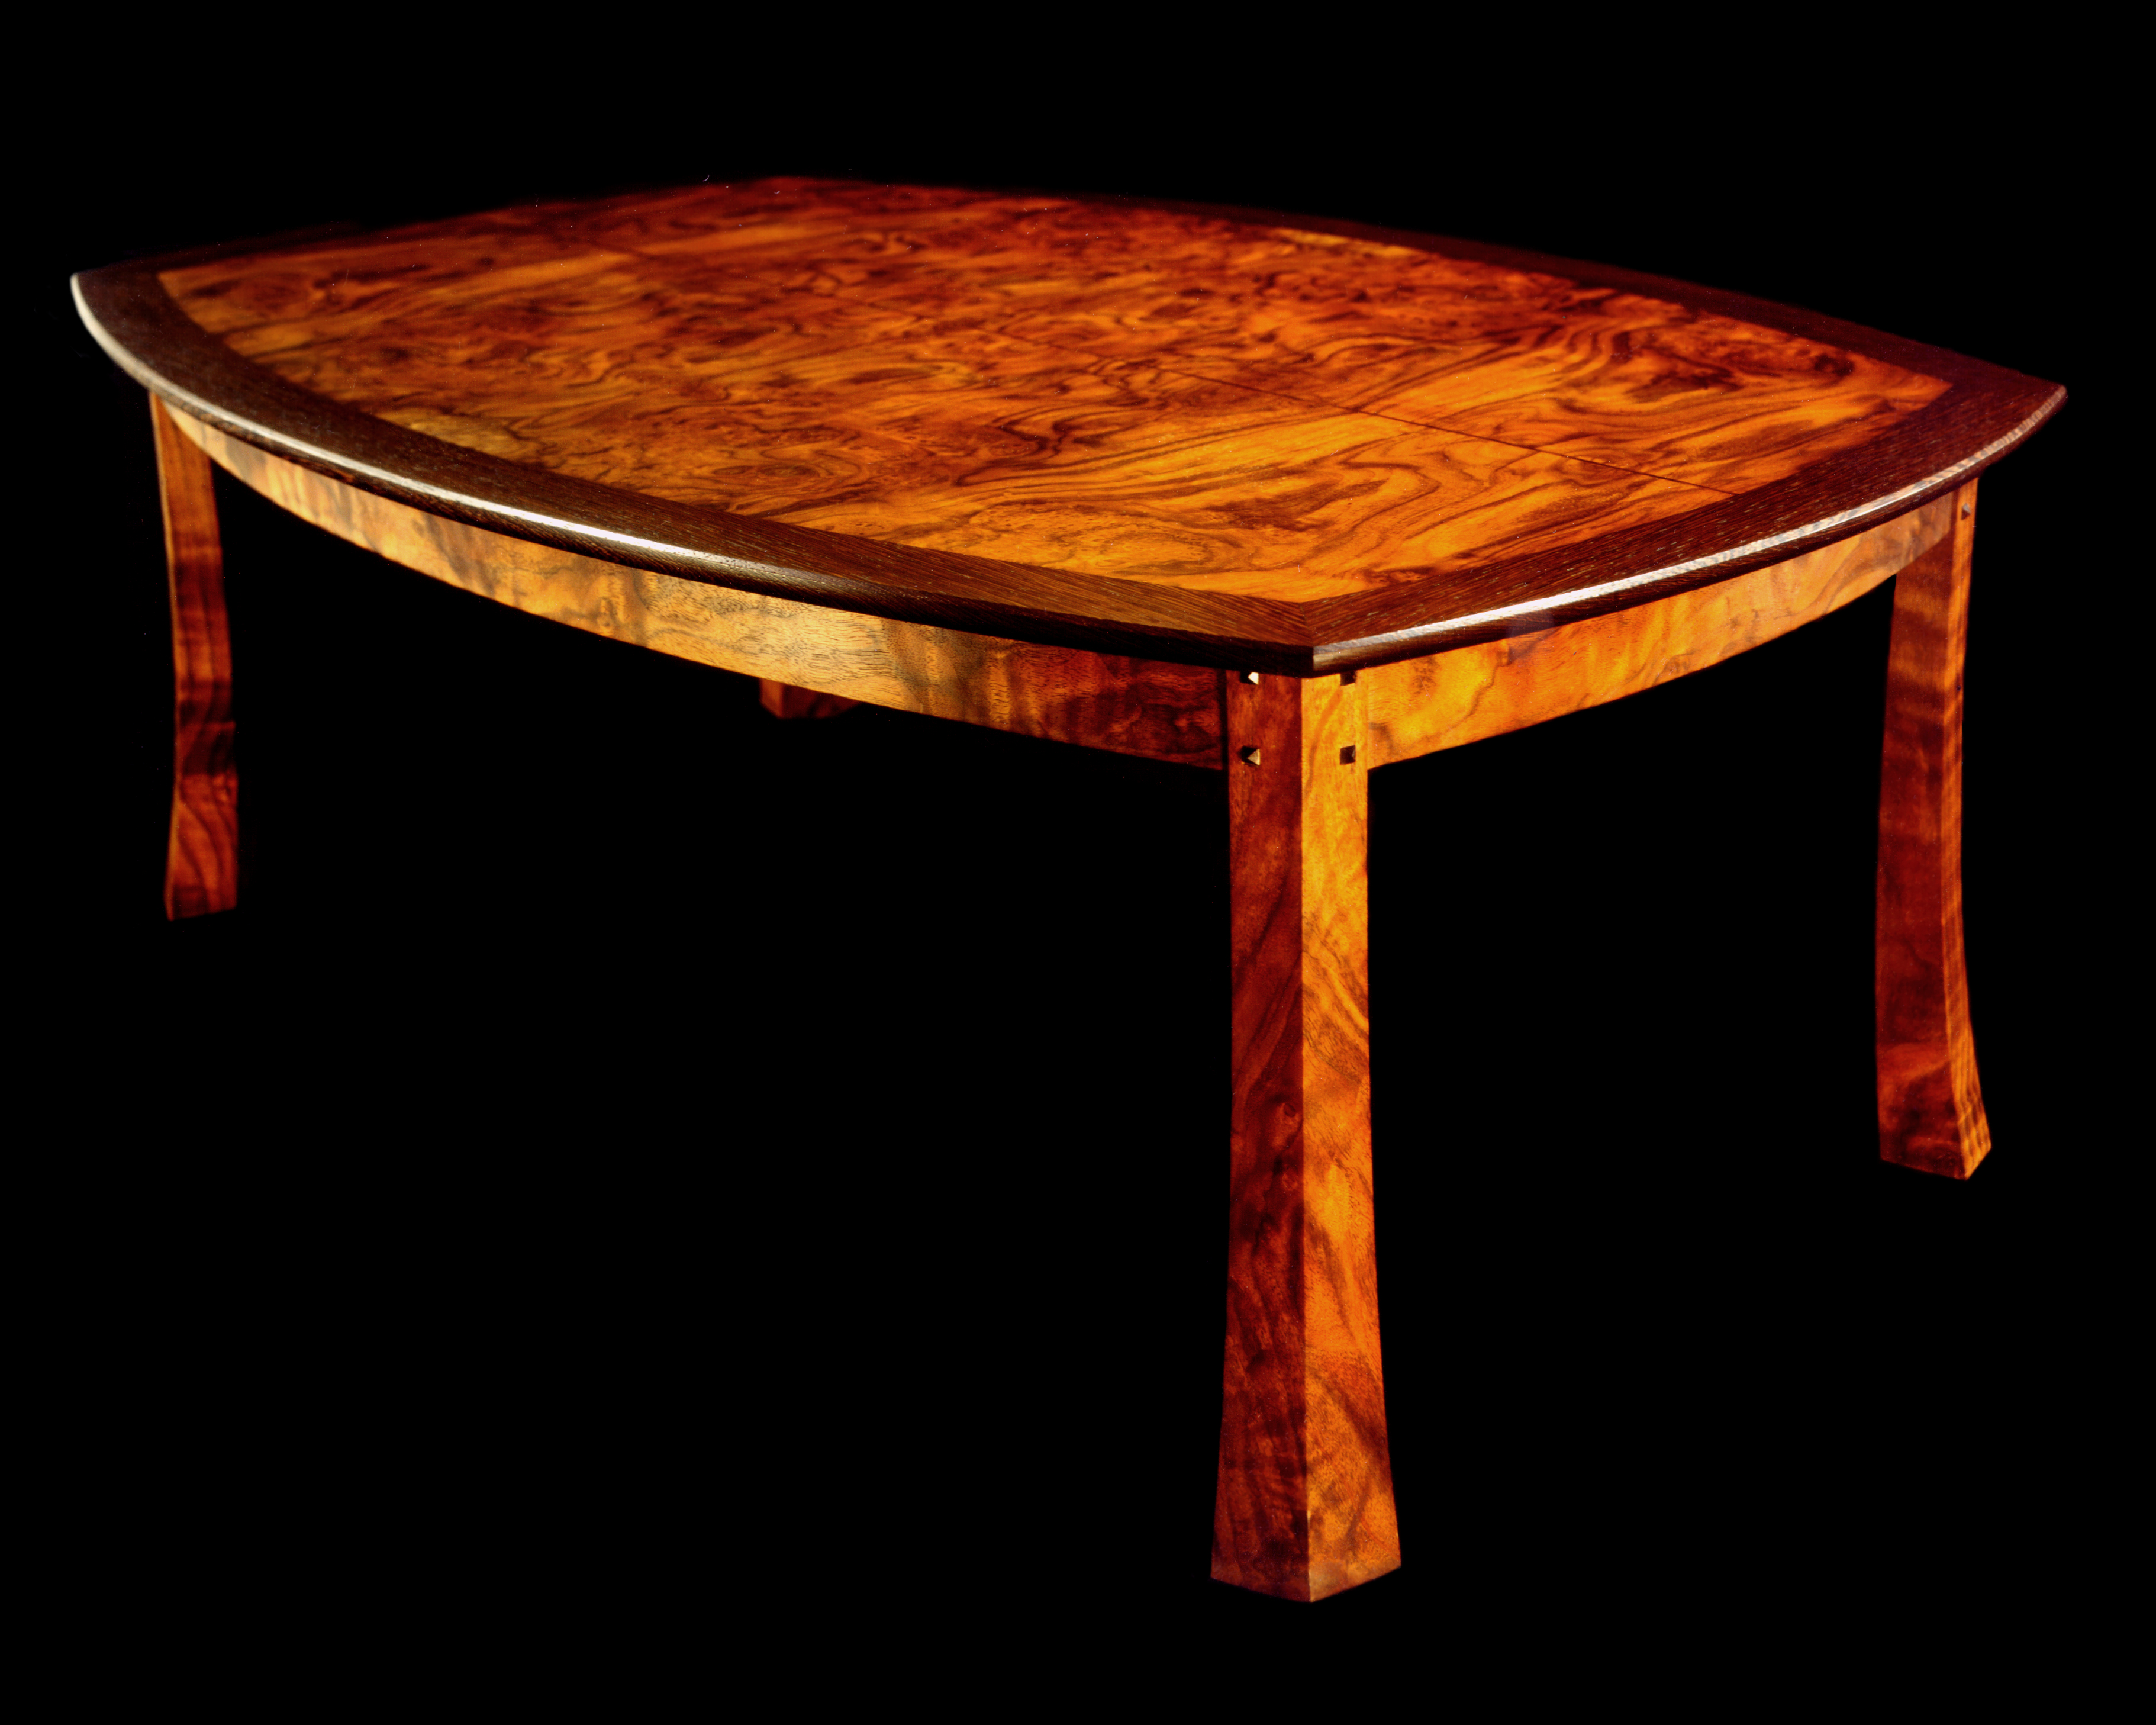 A Walnut Coffie Table With Flaired Legs by Don DeDobbeleer, Fine Custom Wood Furniture